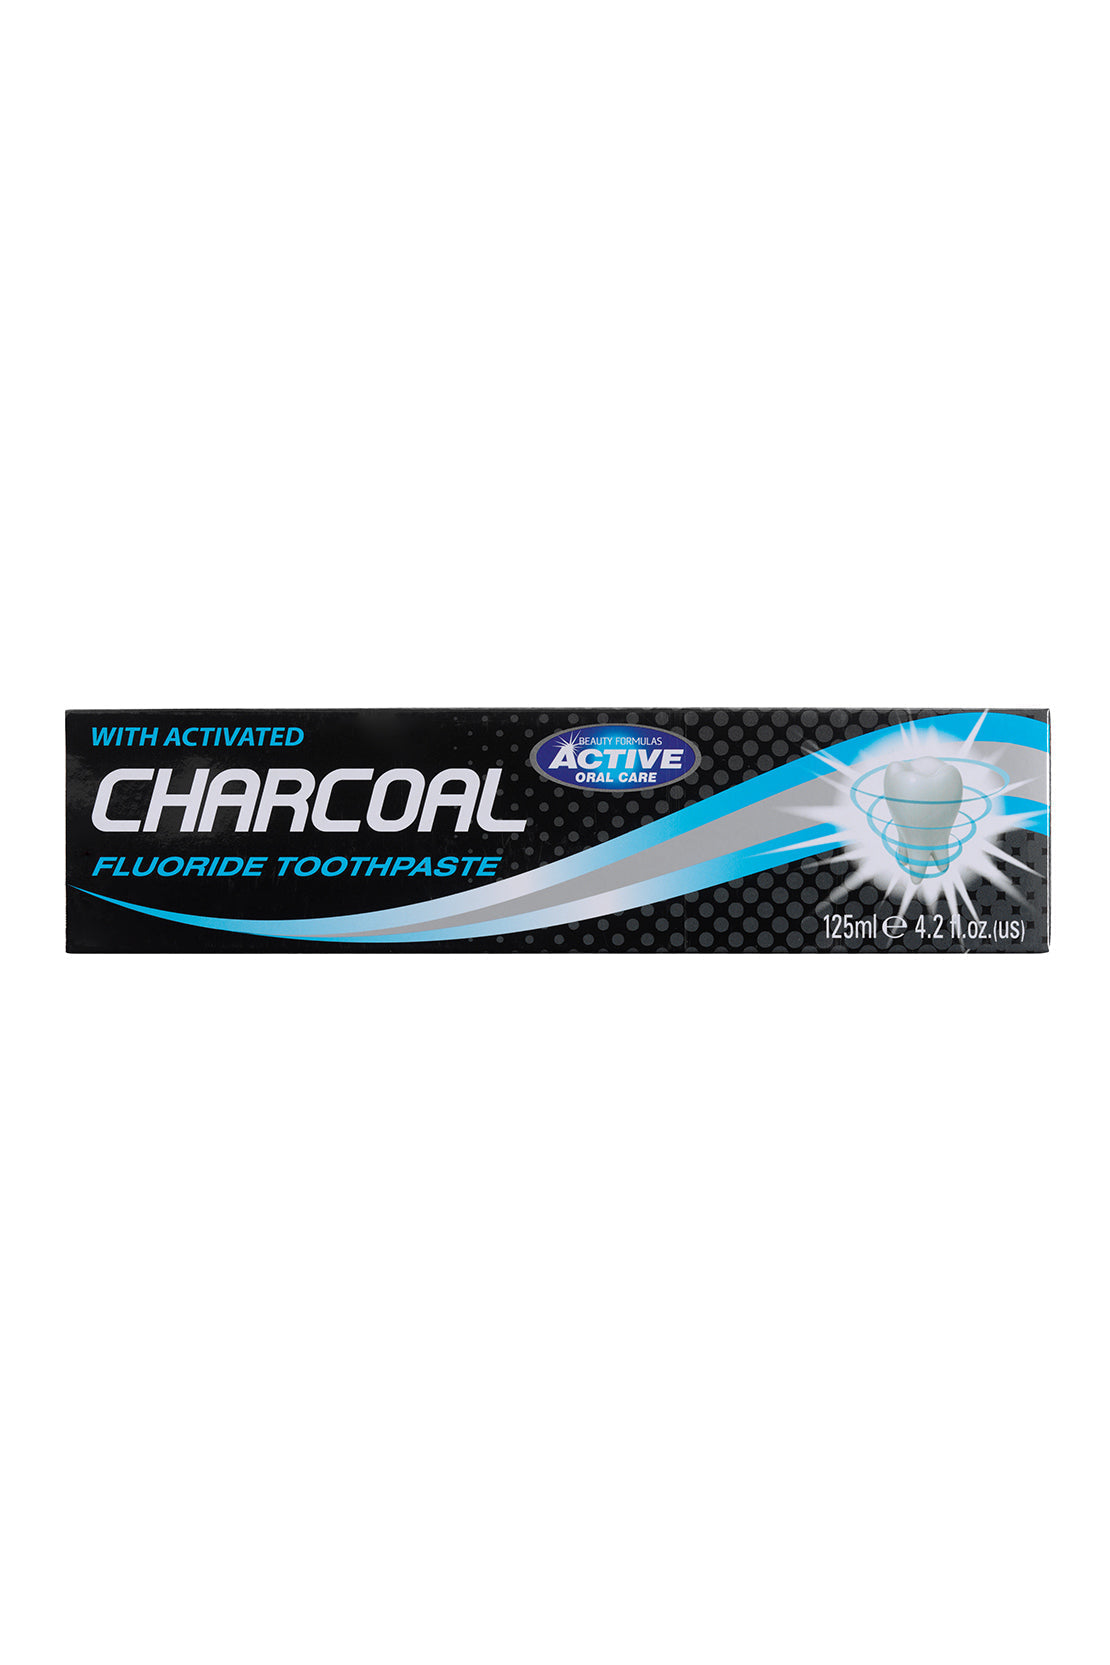 Active Charcoal Fluoride Tooth Paste 125ml RIOS